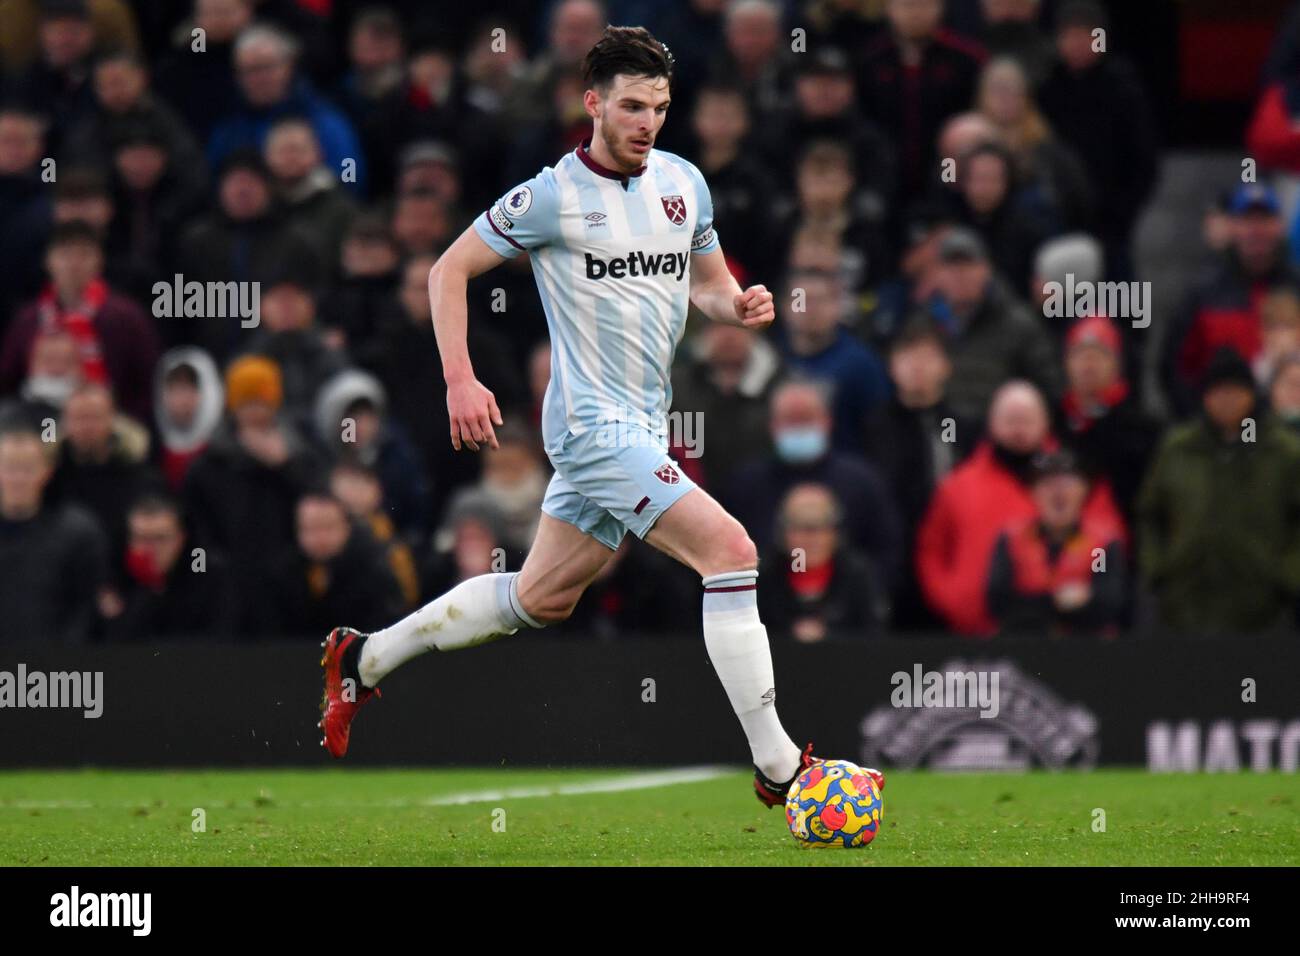 Manchester, UK. 22nd Jan, 2022. West Ham United's Declan Rice during the Premier League match at Old Trafford, Manchester, UK. Picture date: Sunday January 23, 2022. Photo credit should read: Anthony Devlin Credit: Anthony Devlin/Alamy Live News Stock Photo